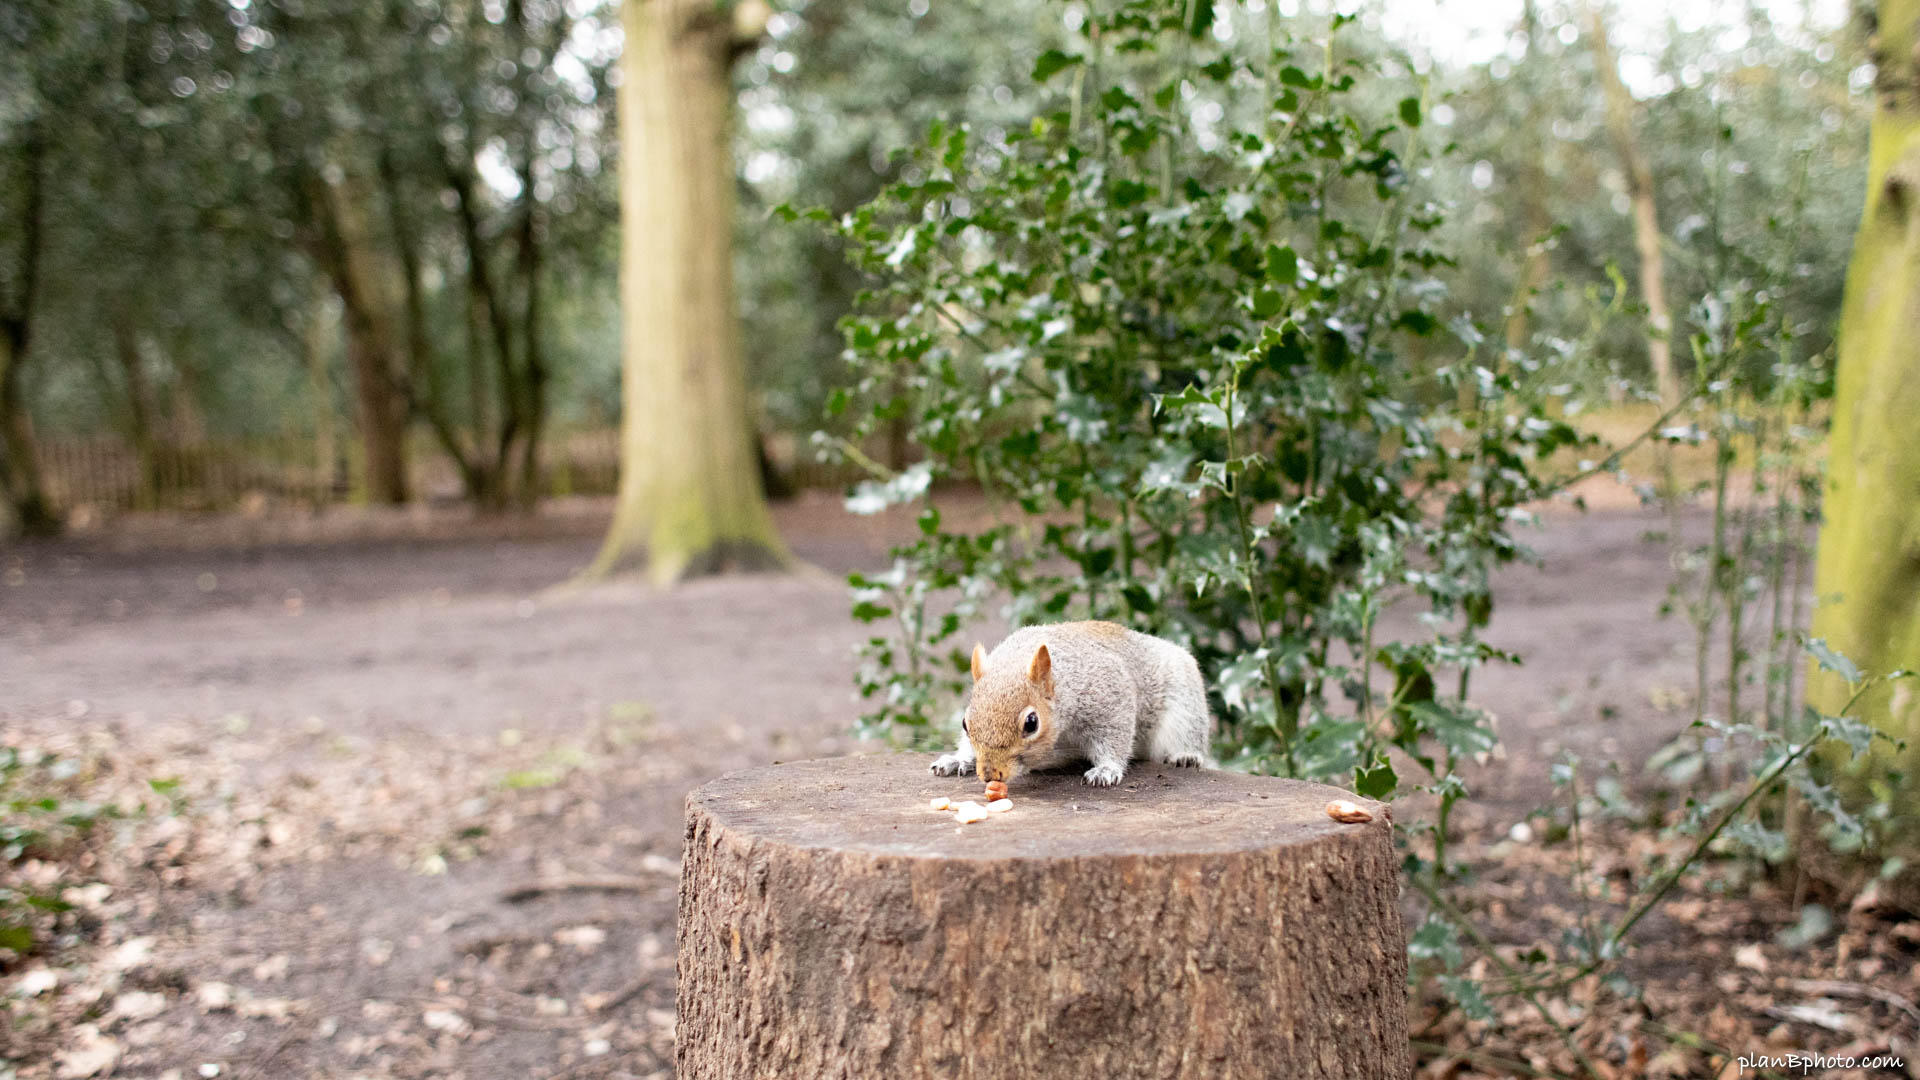 Image of a squirrel taken from far